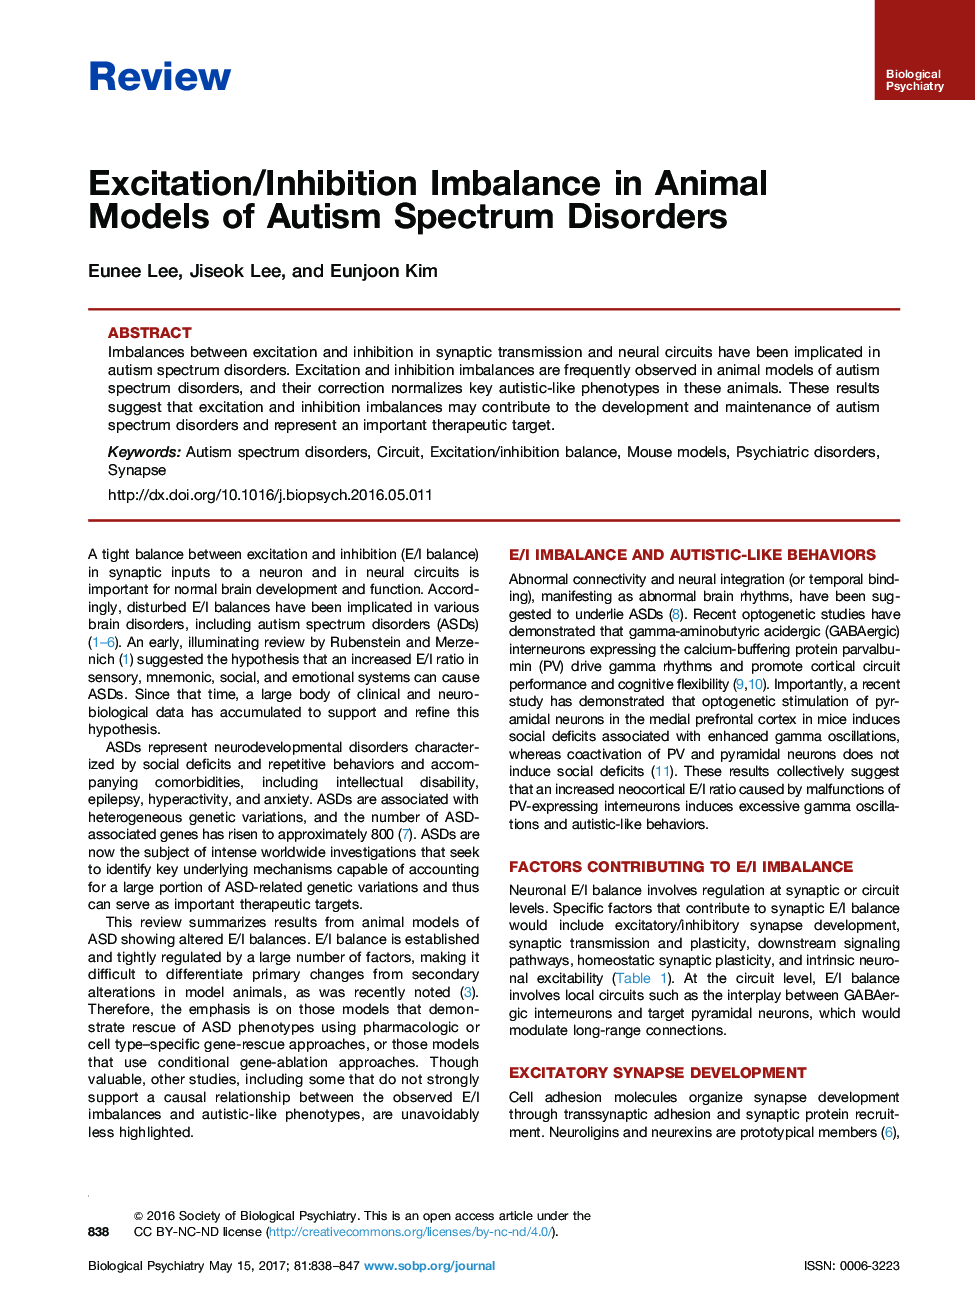 ReviewExcitation/Inhibition Imbalance in Animal Models of Autism Spectrum Disorders